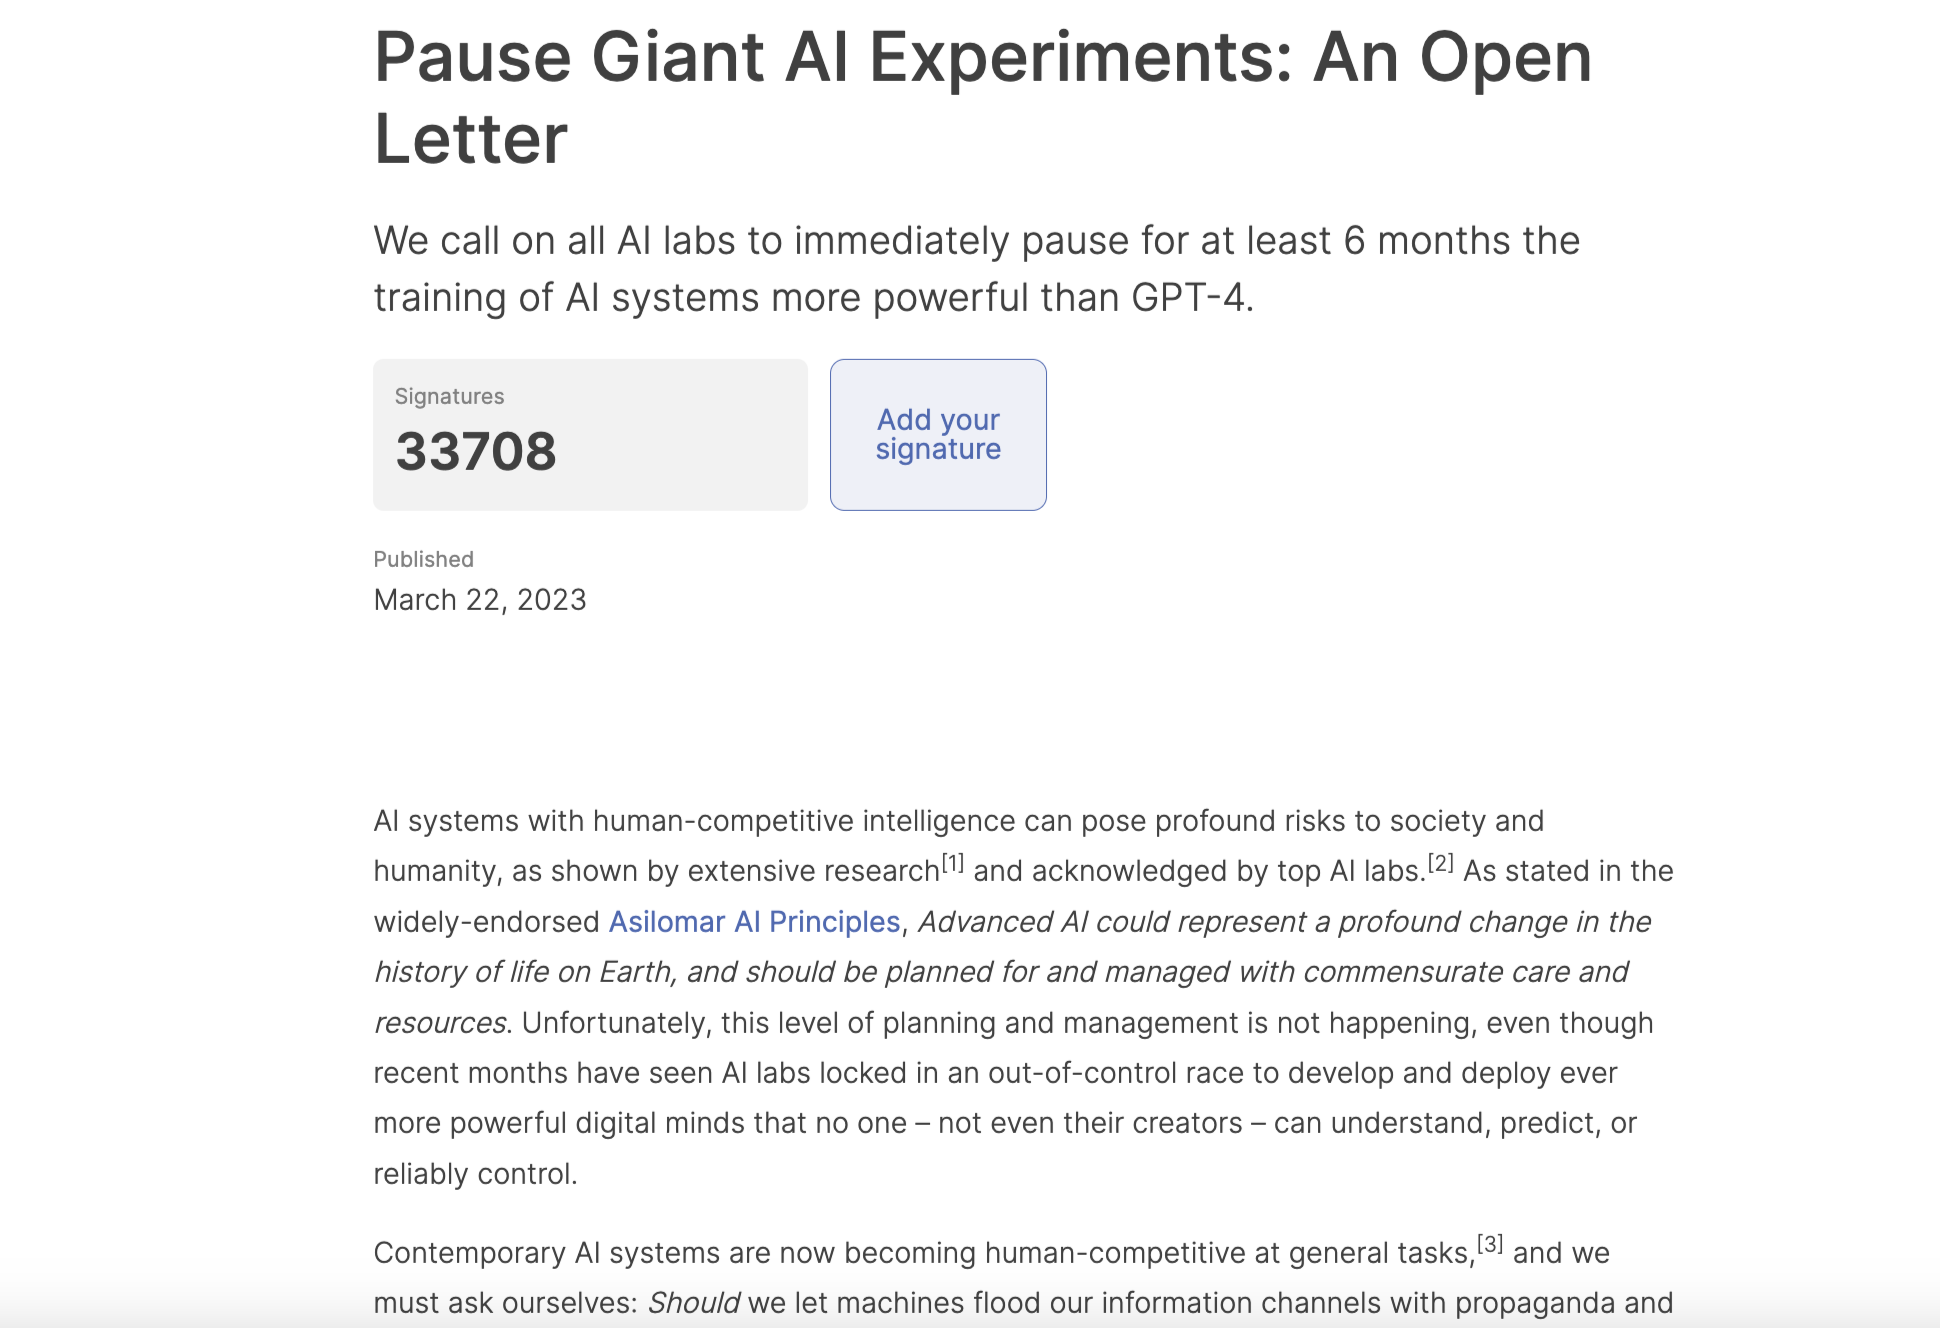 screenshot of open letter regarding AI ethics, signed my Elon Musk and others.